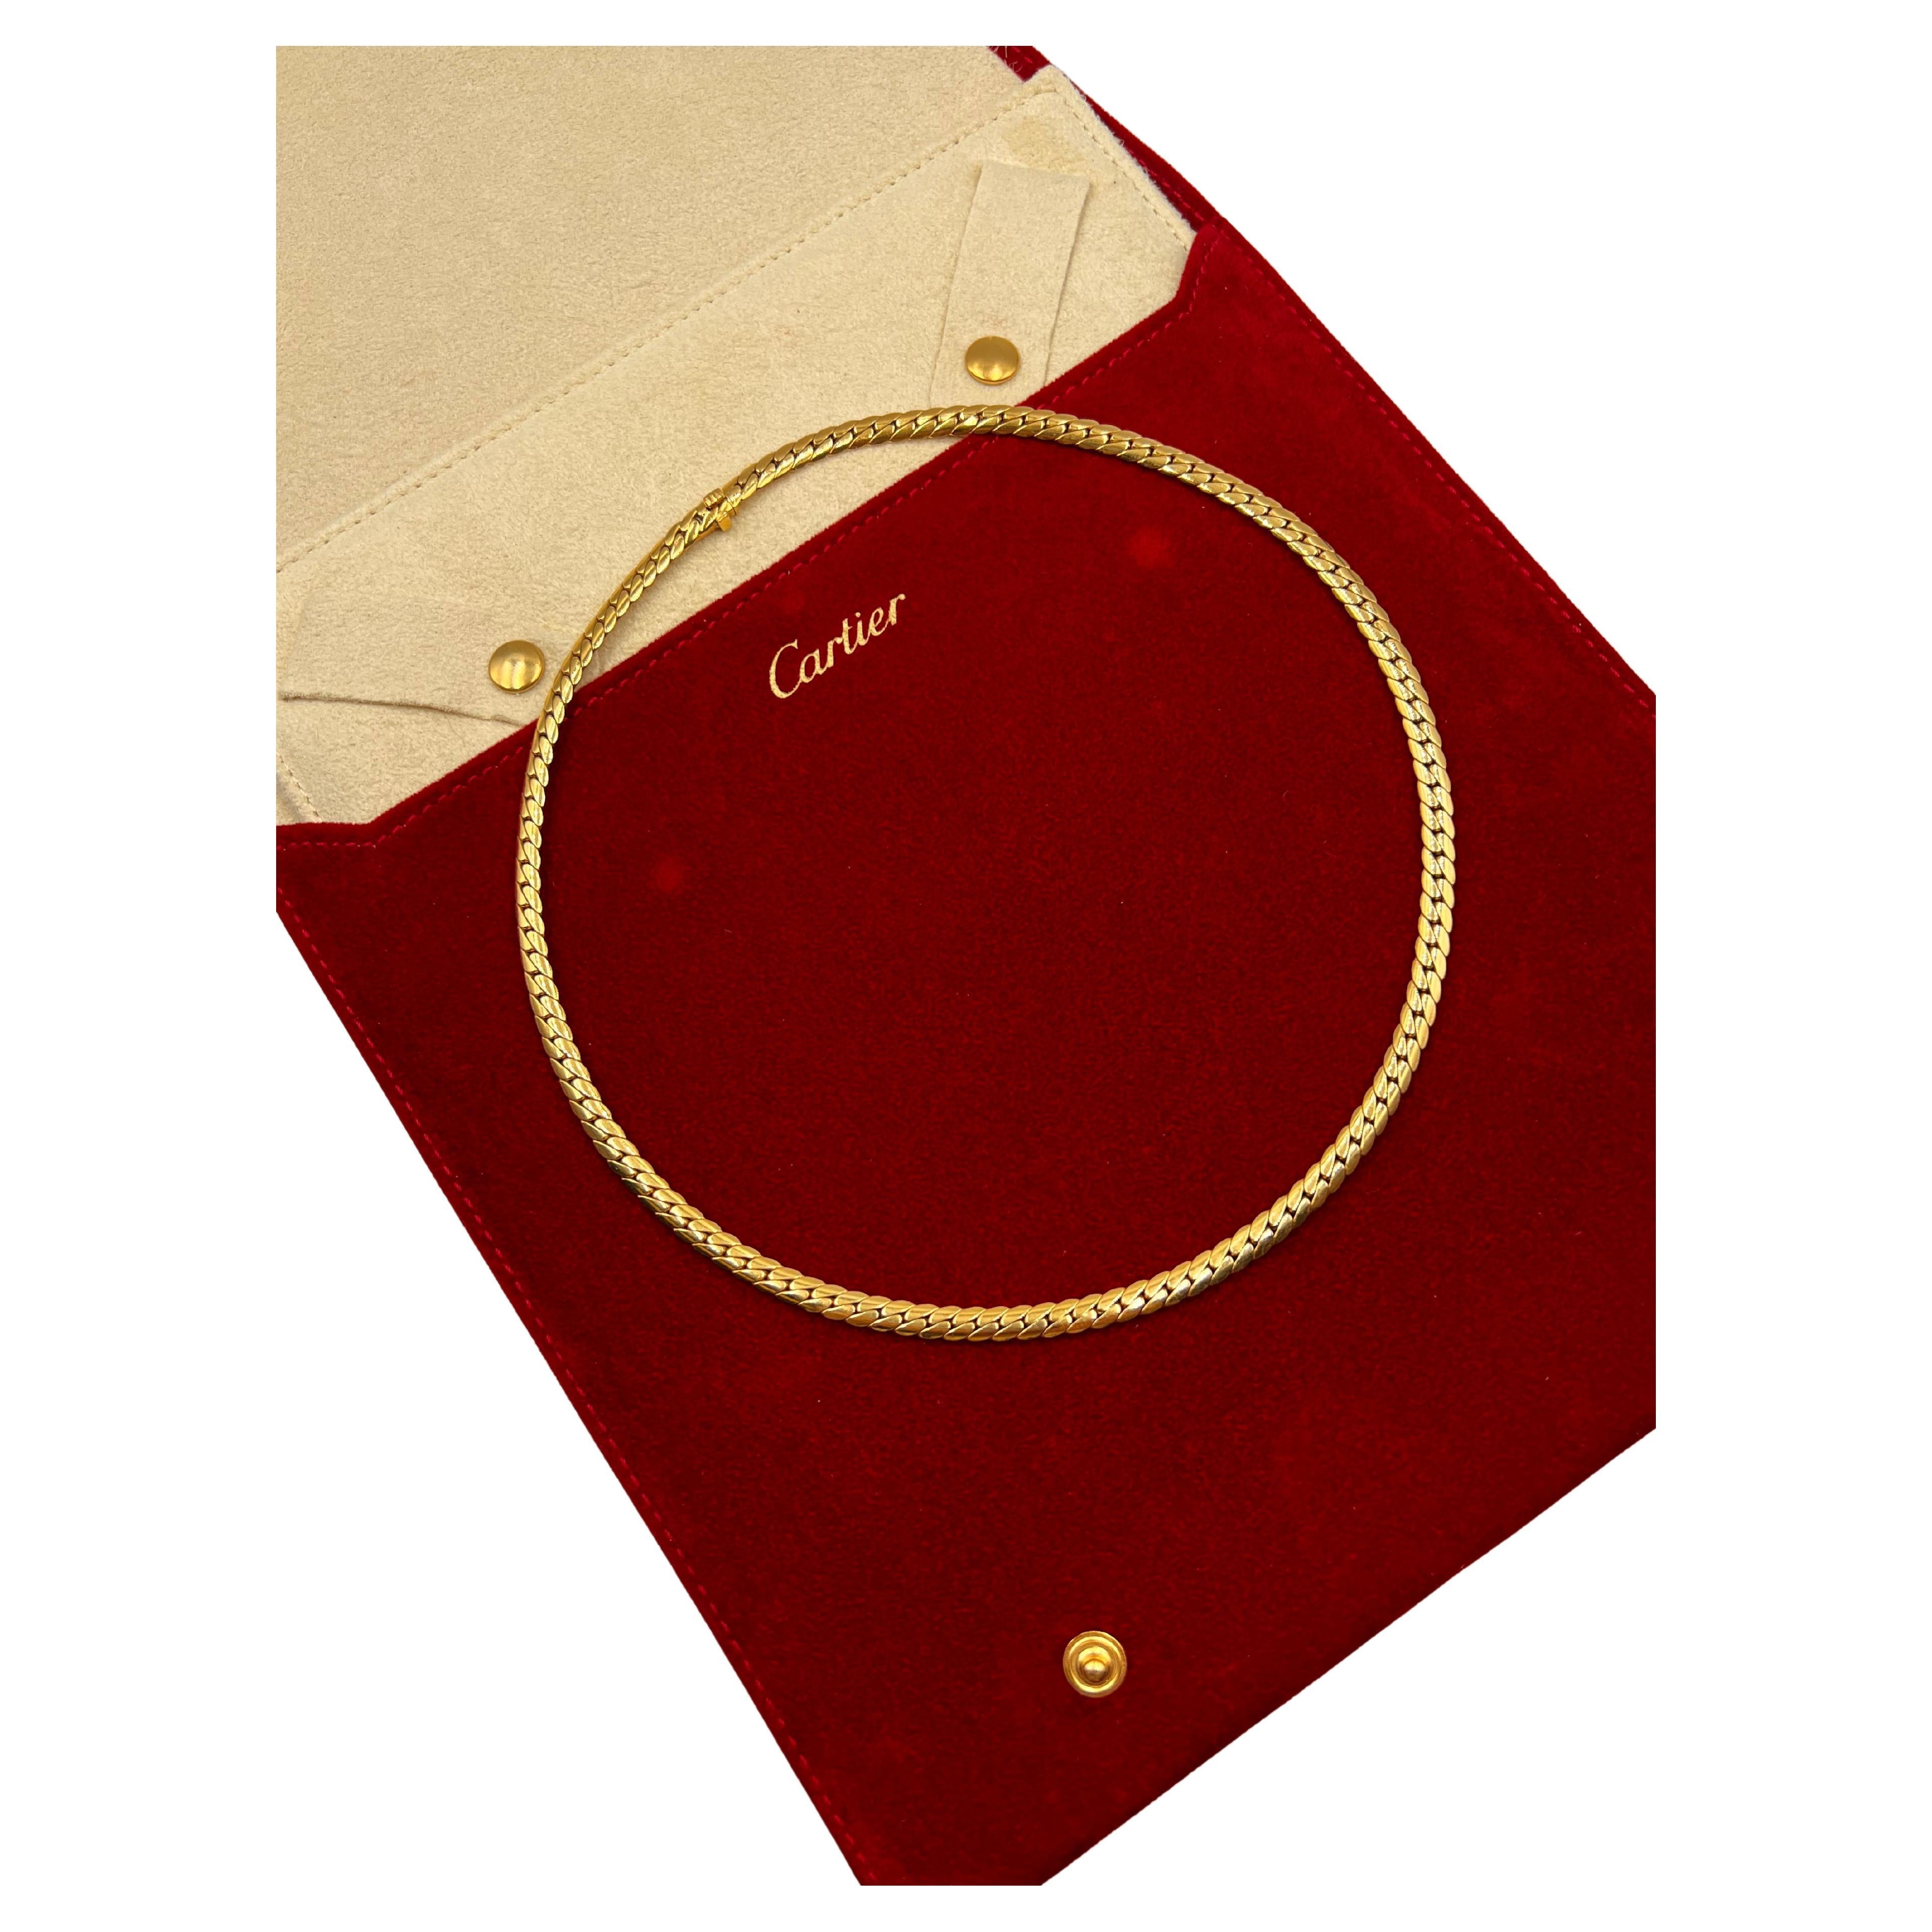 Cartier collar necklace, featuring a Cuban-style curb chain link in polished 18k yellow gold. Measuring 4.5mm in width and 17